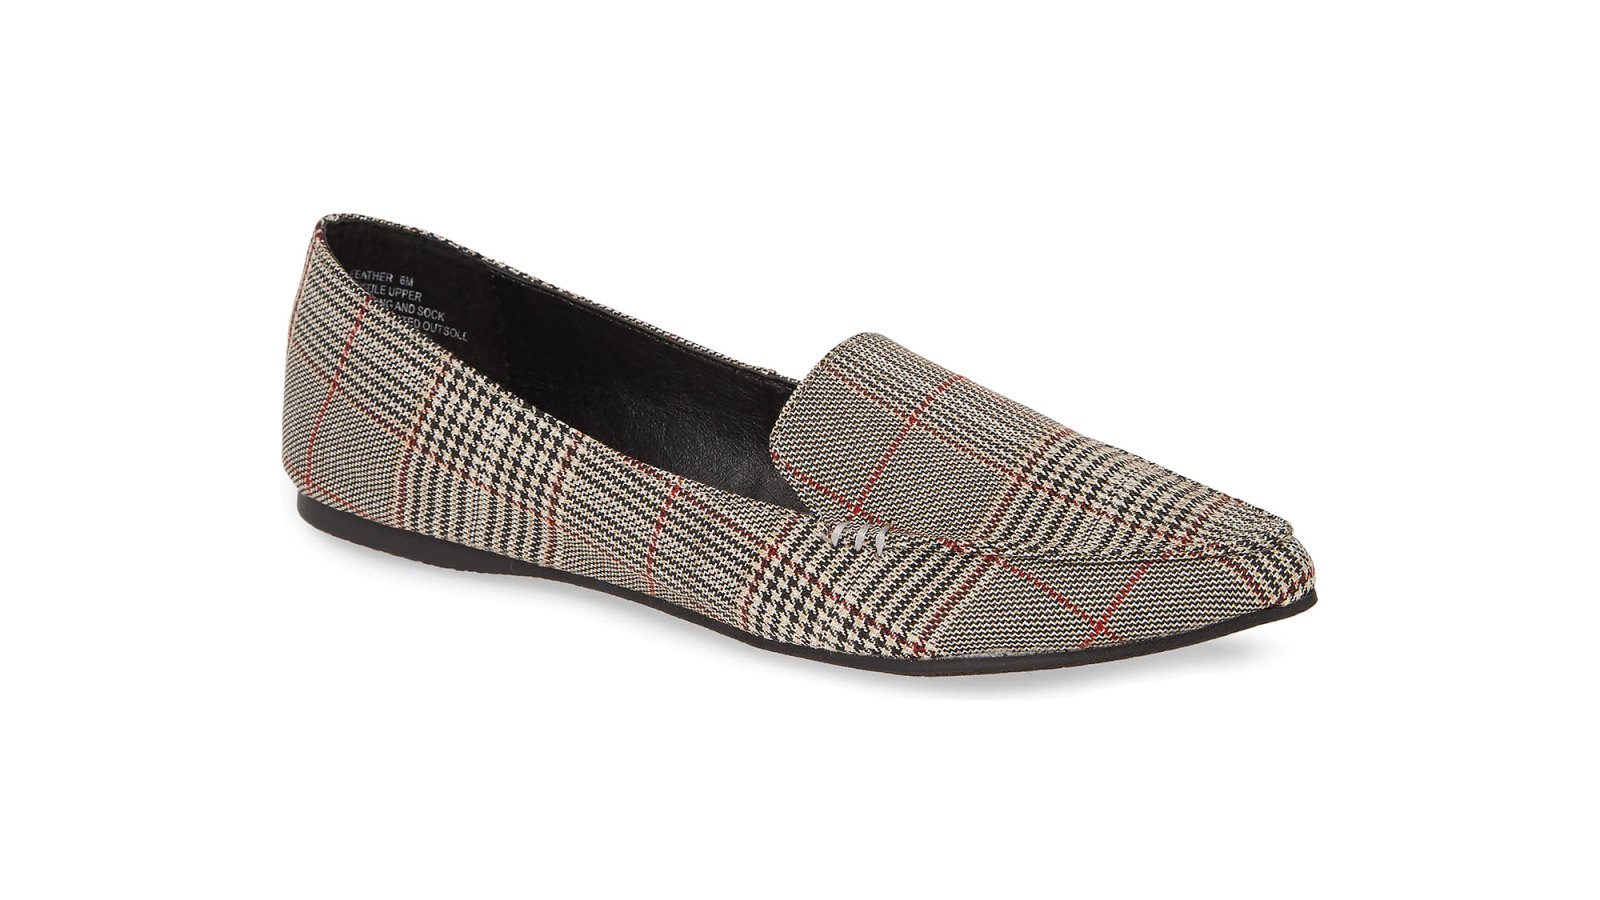 Steve Madden Feather Loafer Flats Are 40% Off and 'Timeless'